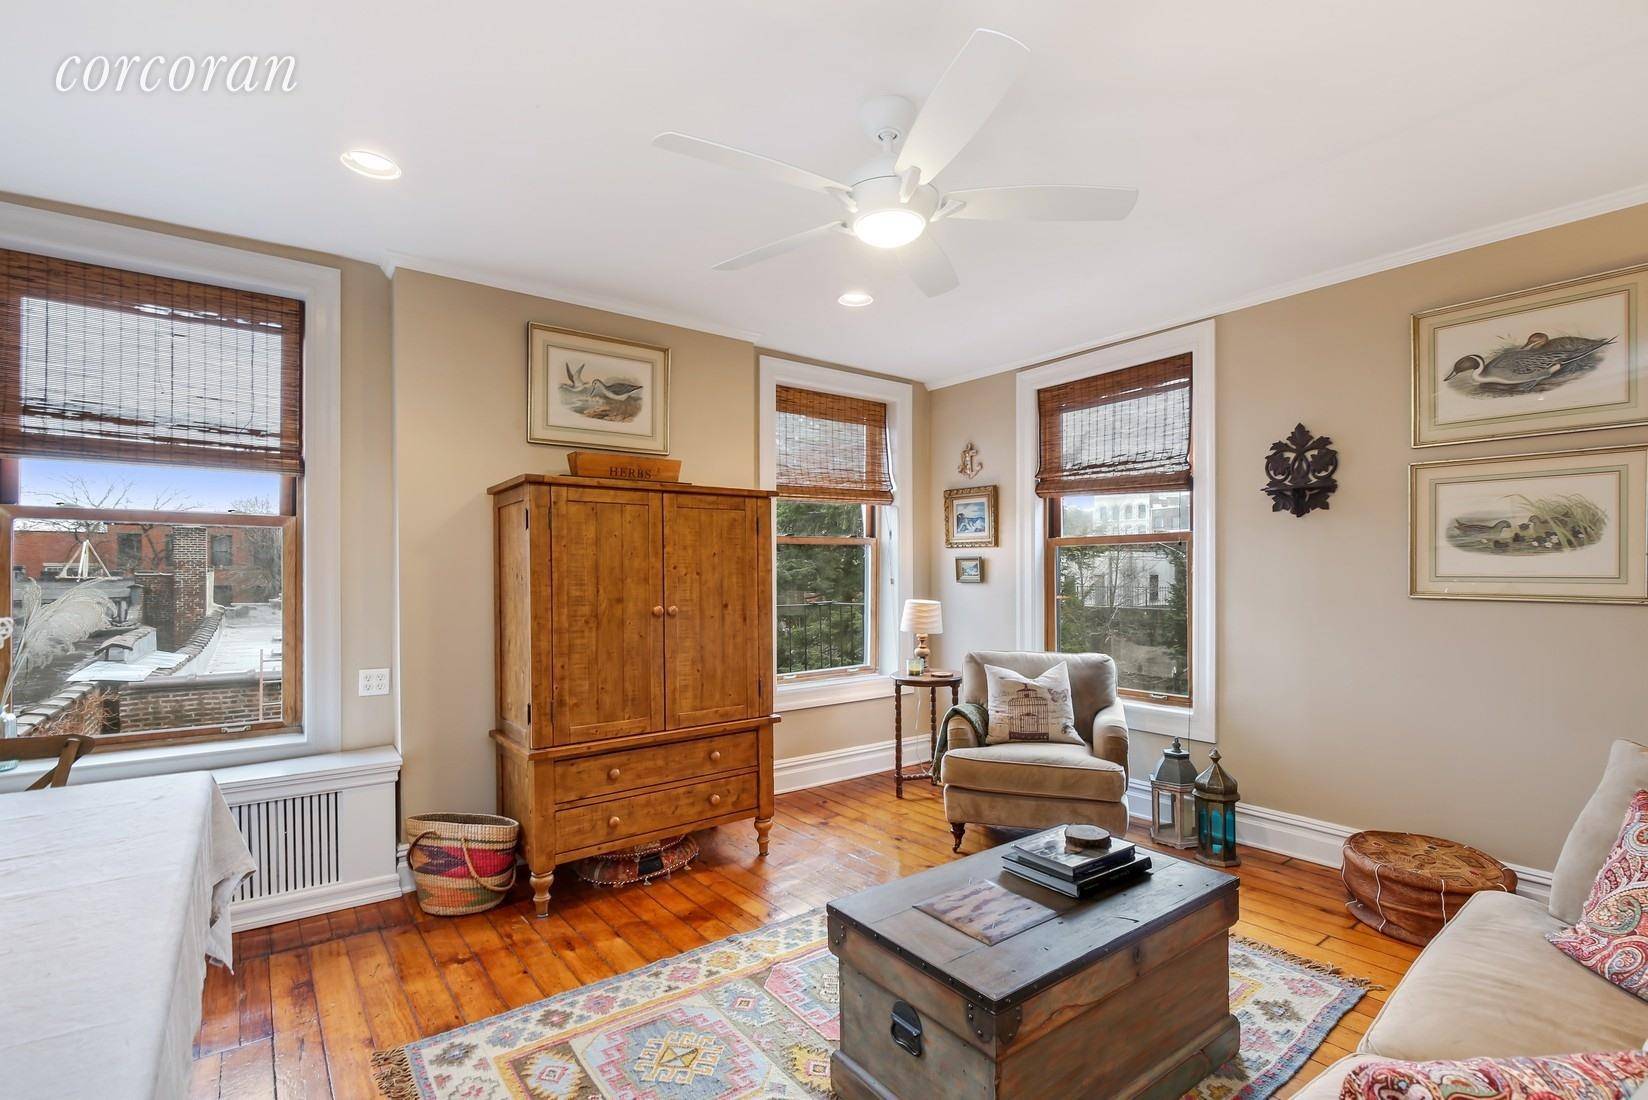 This stunning 1200 SF full floor in one of Clinton Hills rare 25 wide brownstones offers space, light, and historic charm beyond your wildest dreams.